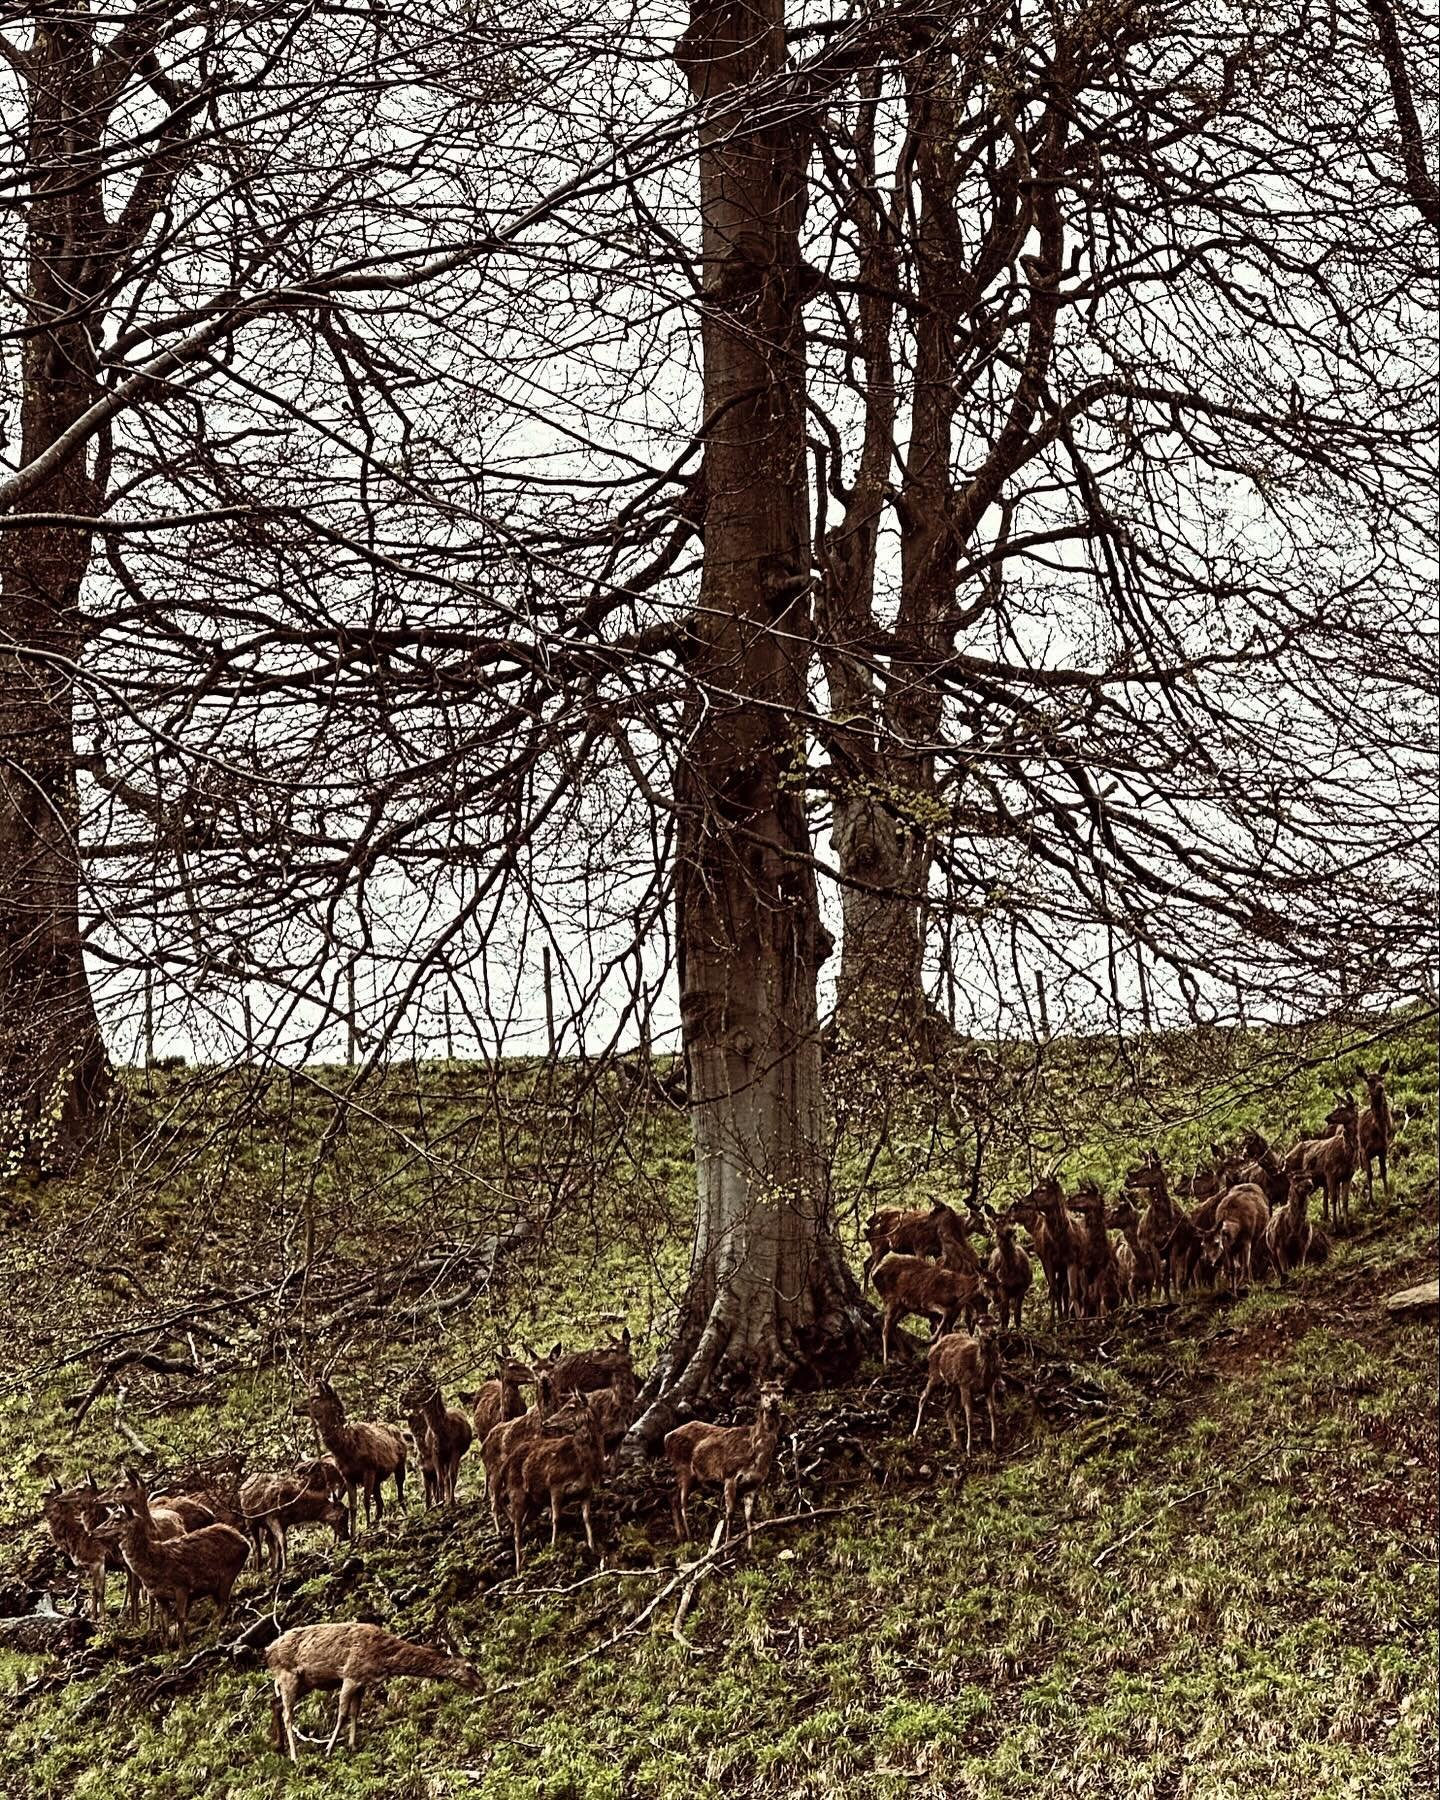 Some deer inspiration at Studley Royal Deer Park&hellip; after I&rsquo;ve finished the drawing!!

@ntfountainsabbey